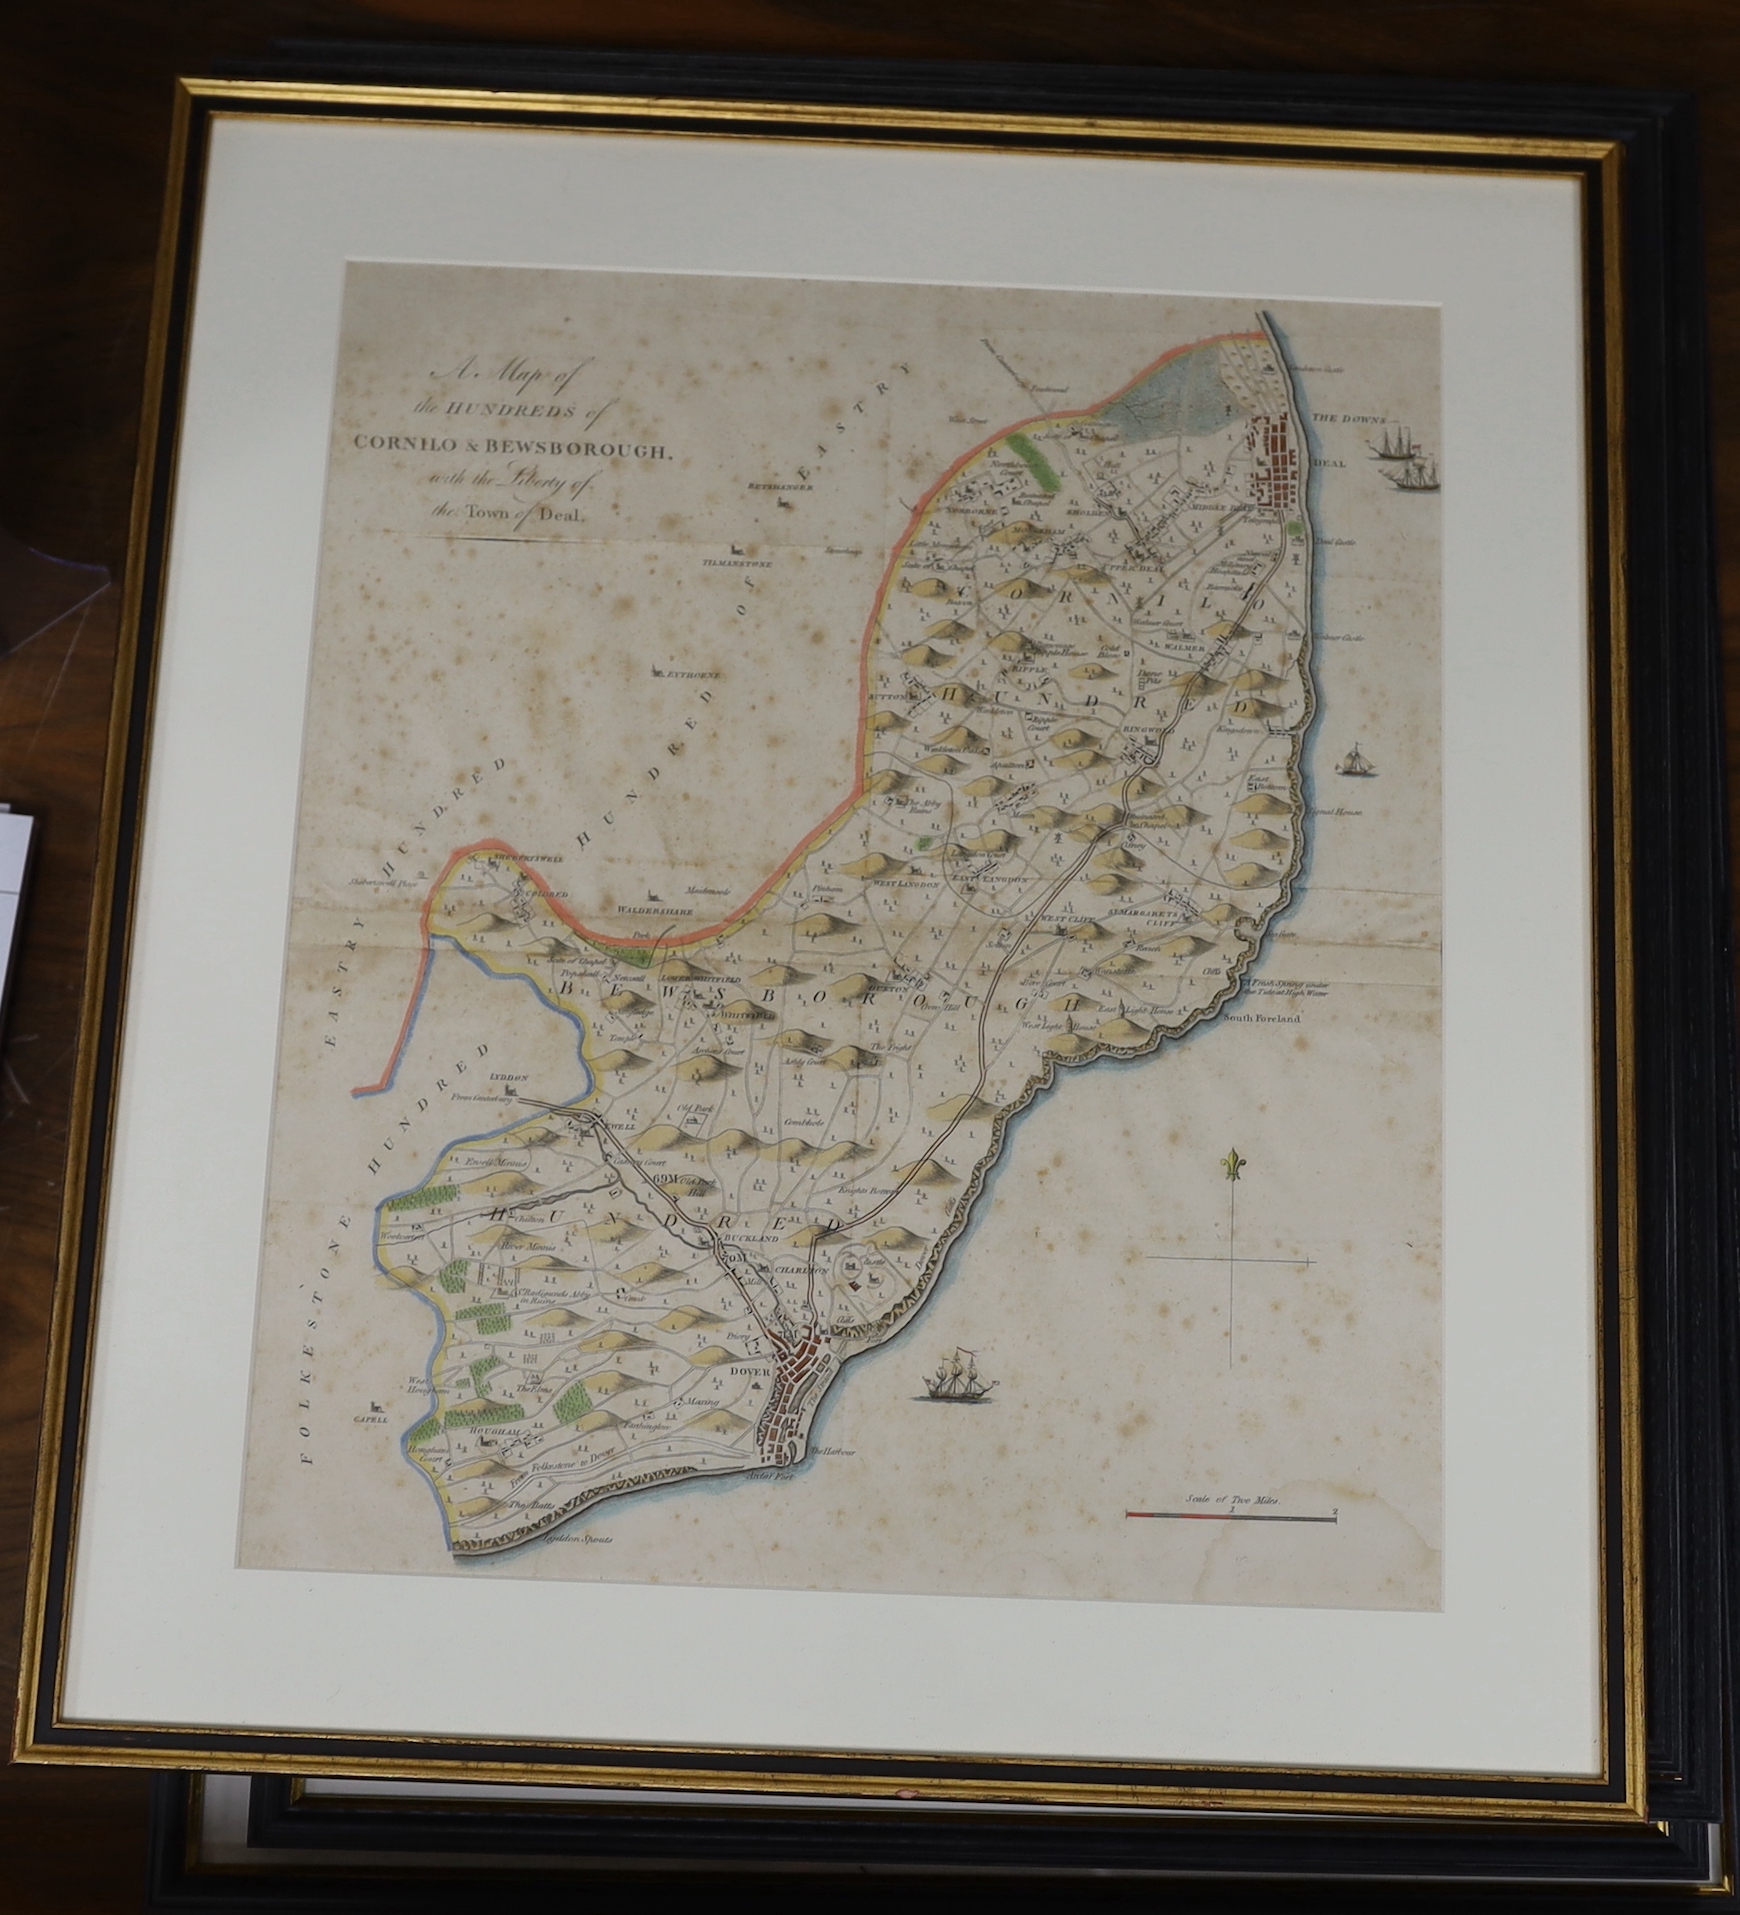 Four 18th / 19th century Map’s of the Hundreds including ‘Loningborough & Folkestone’ together with ‘The Road from London to Dover’, by John Ogilby (1600-1676), largest 50 x 39cm